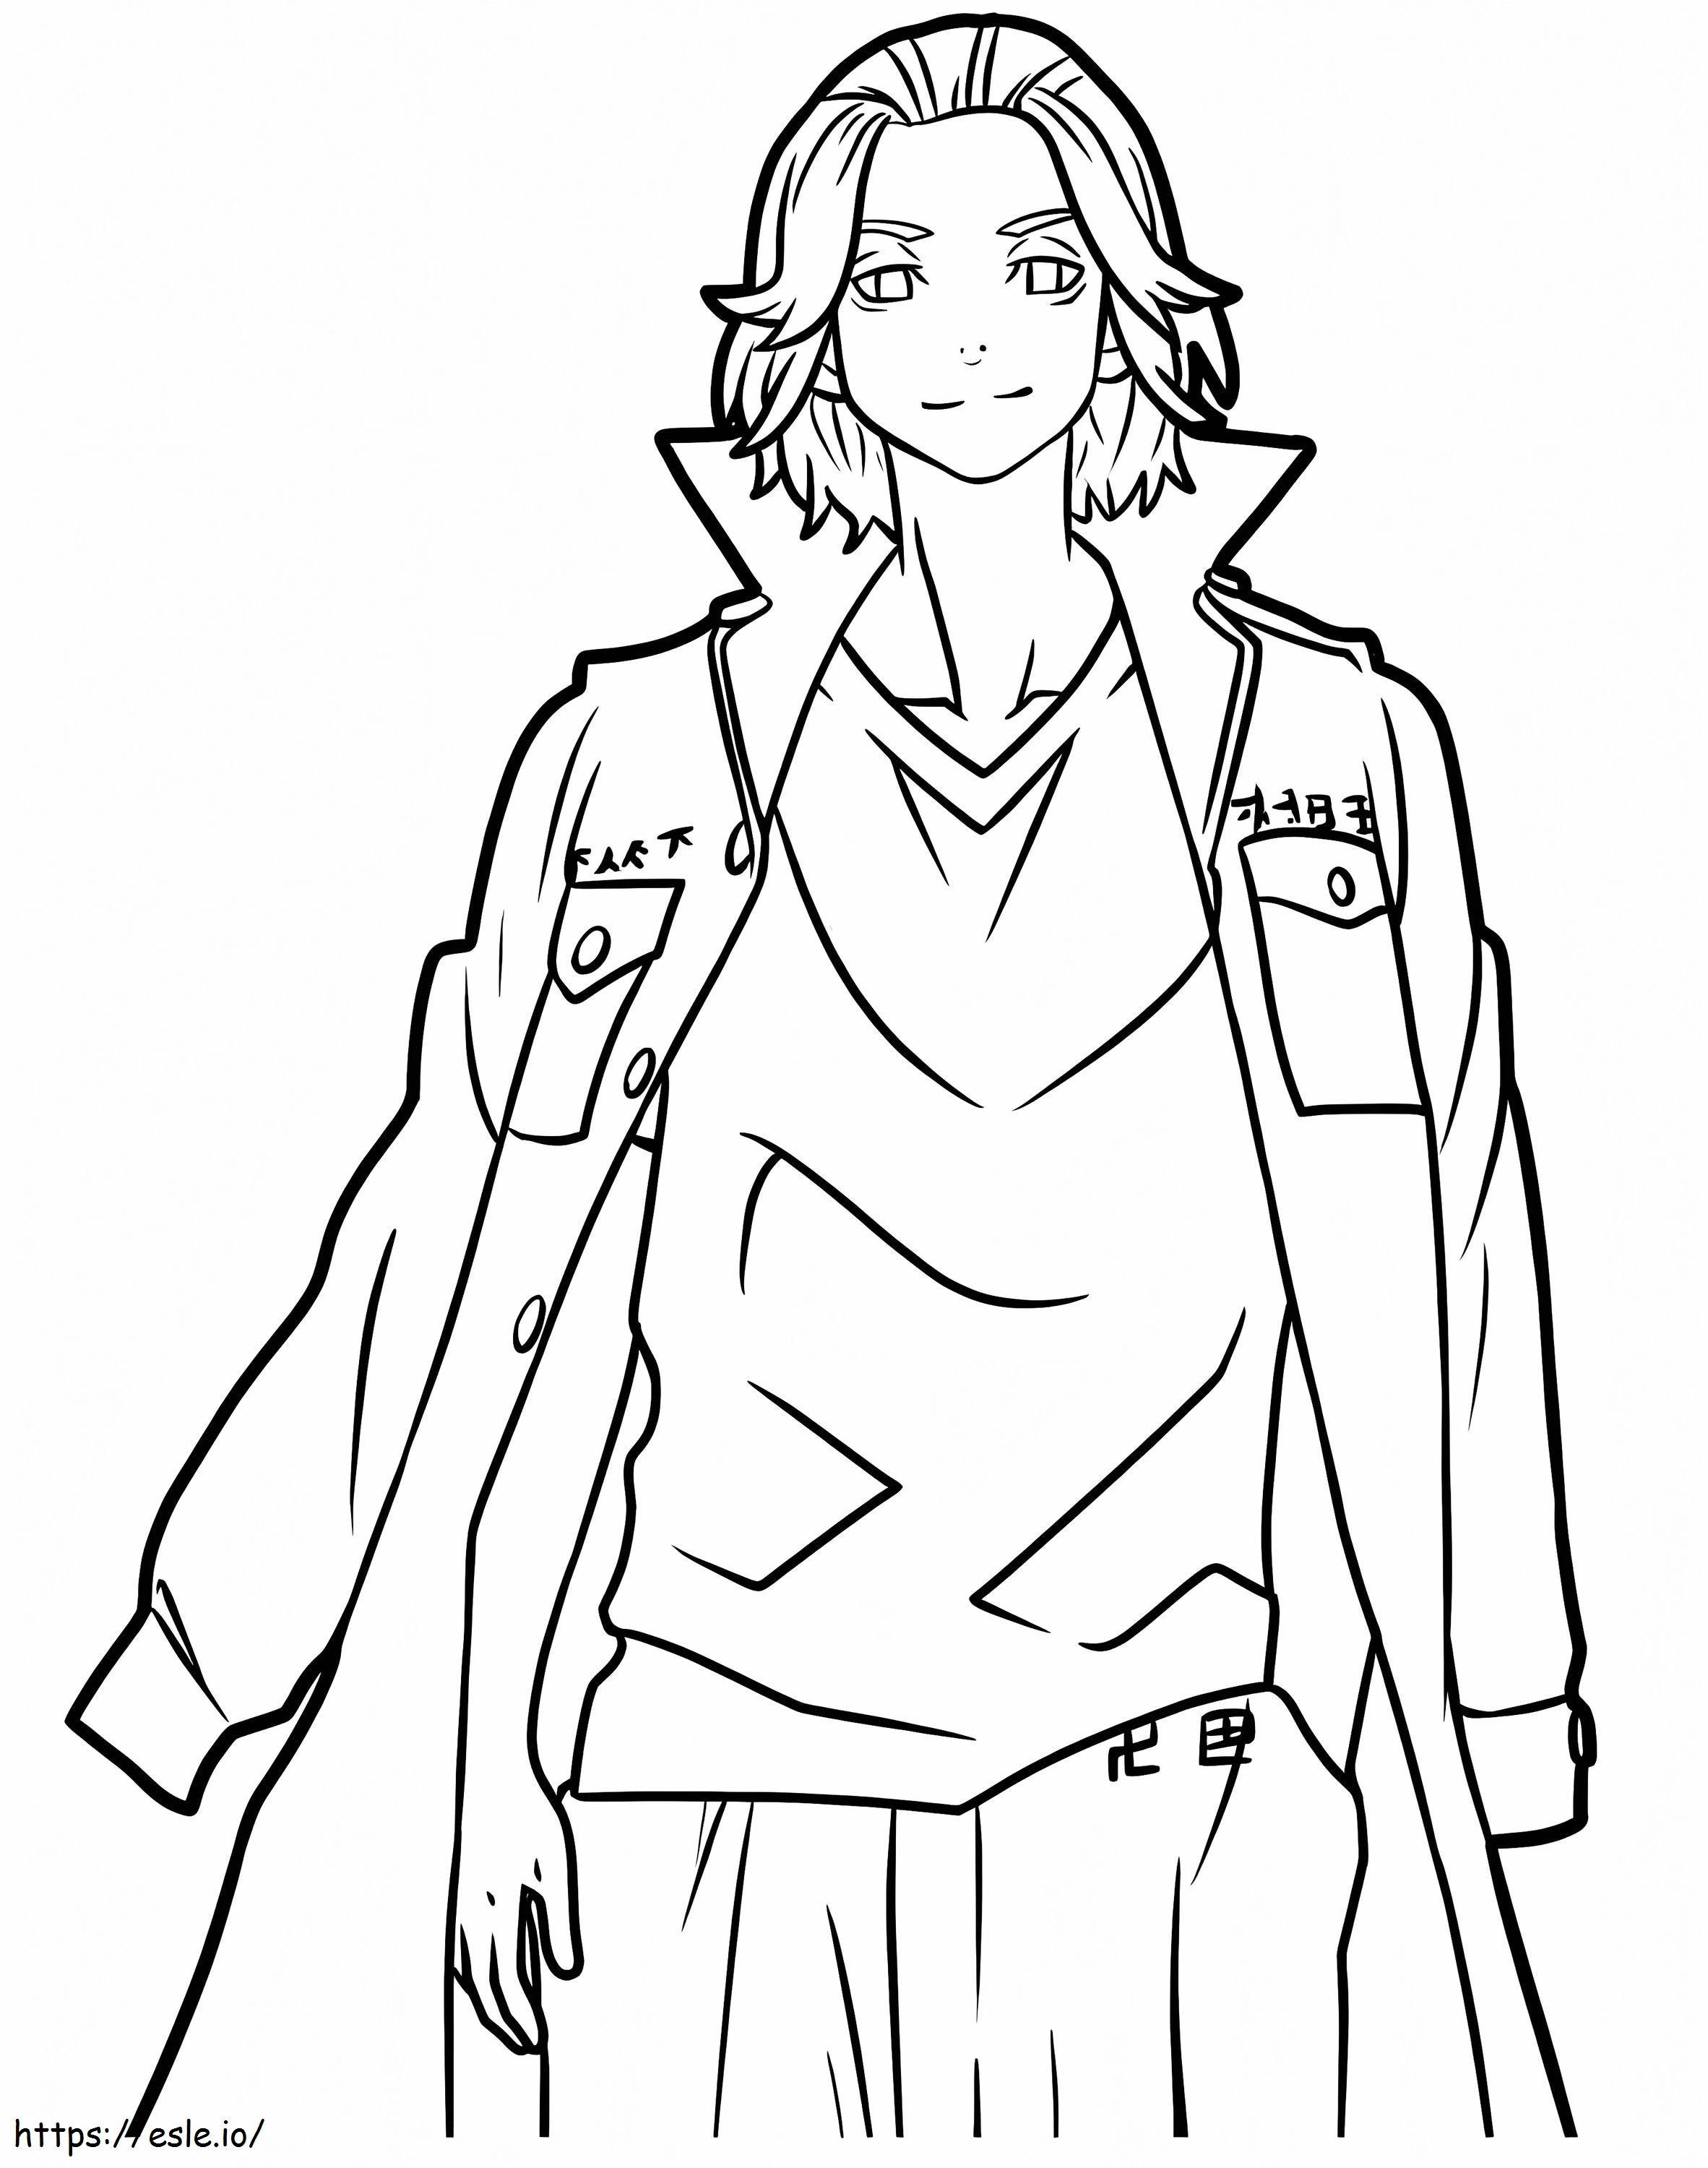 Manjiro Sano From Tokyo Revengers coloring page